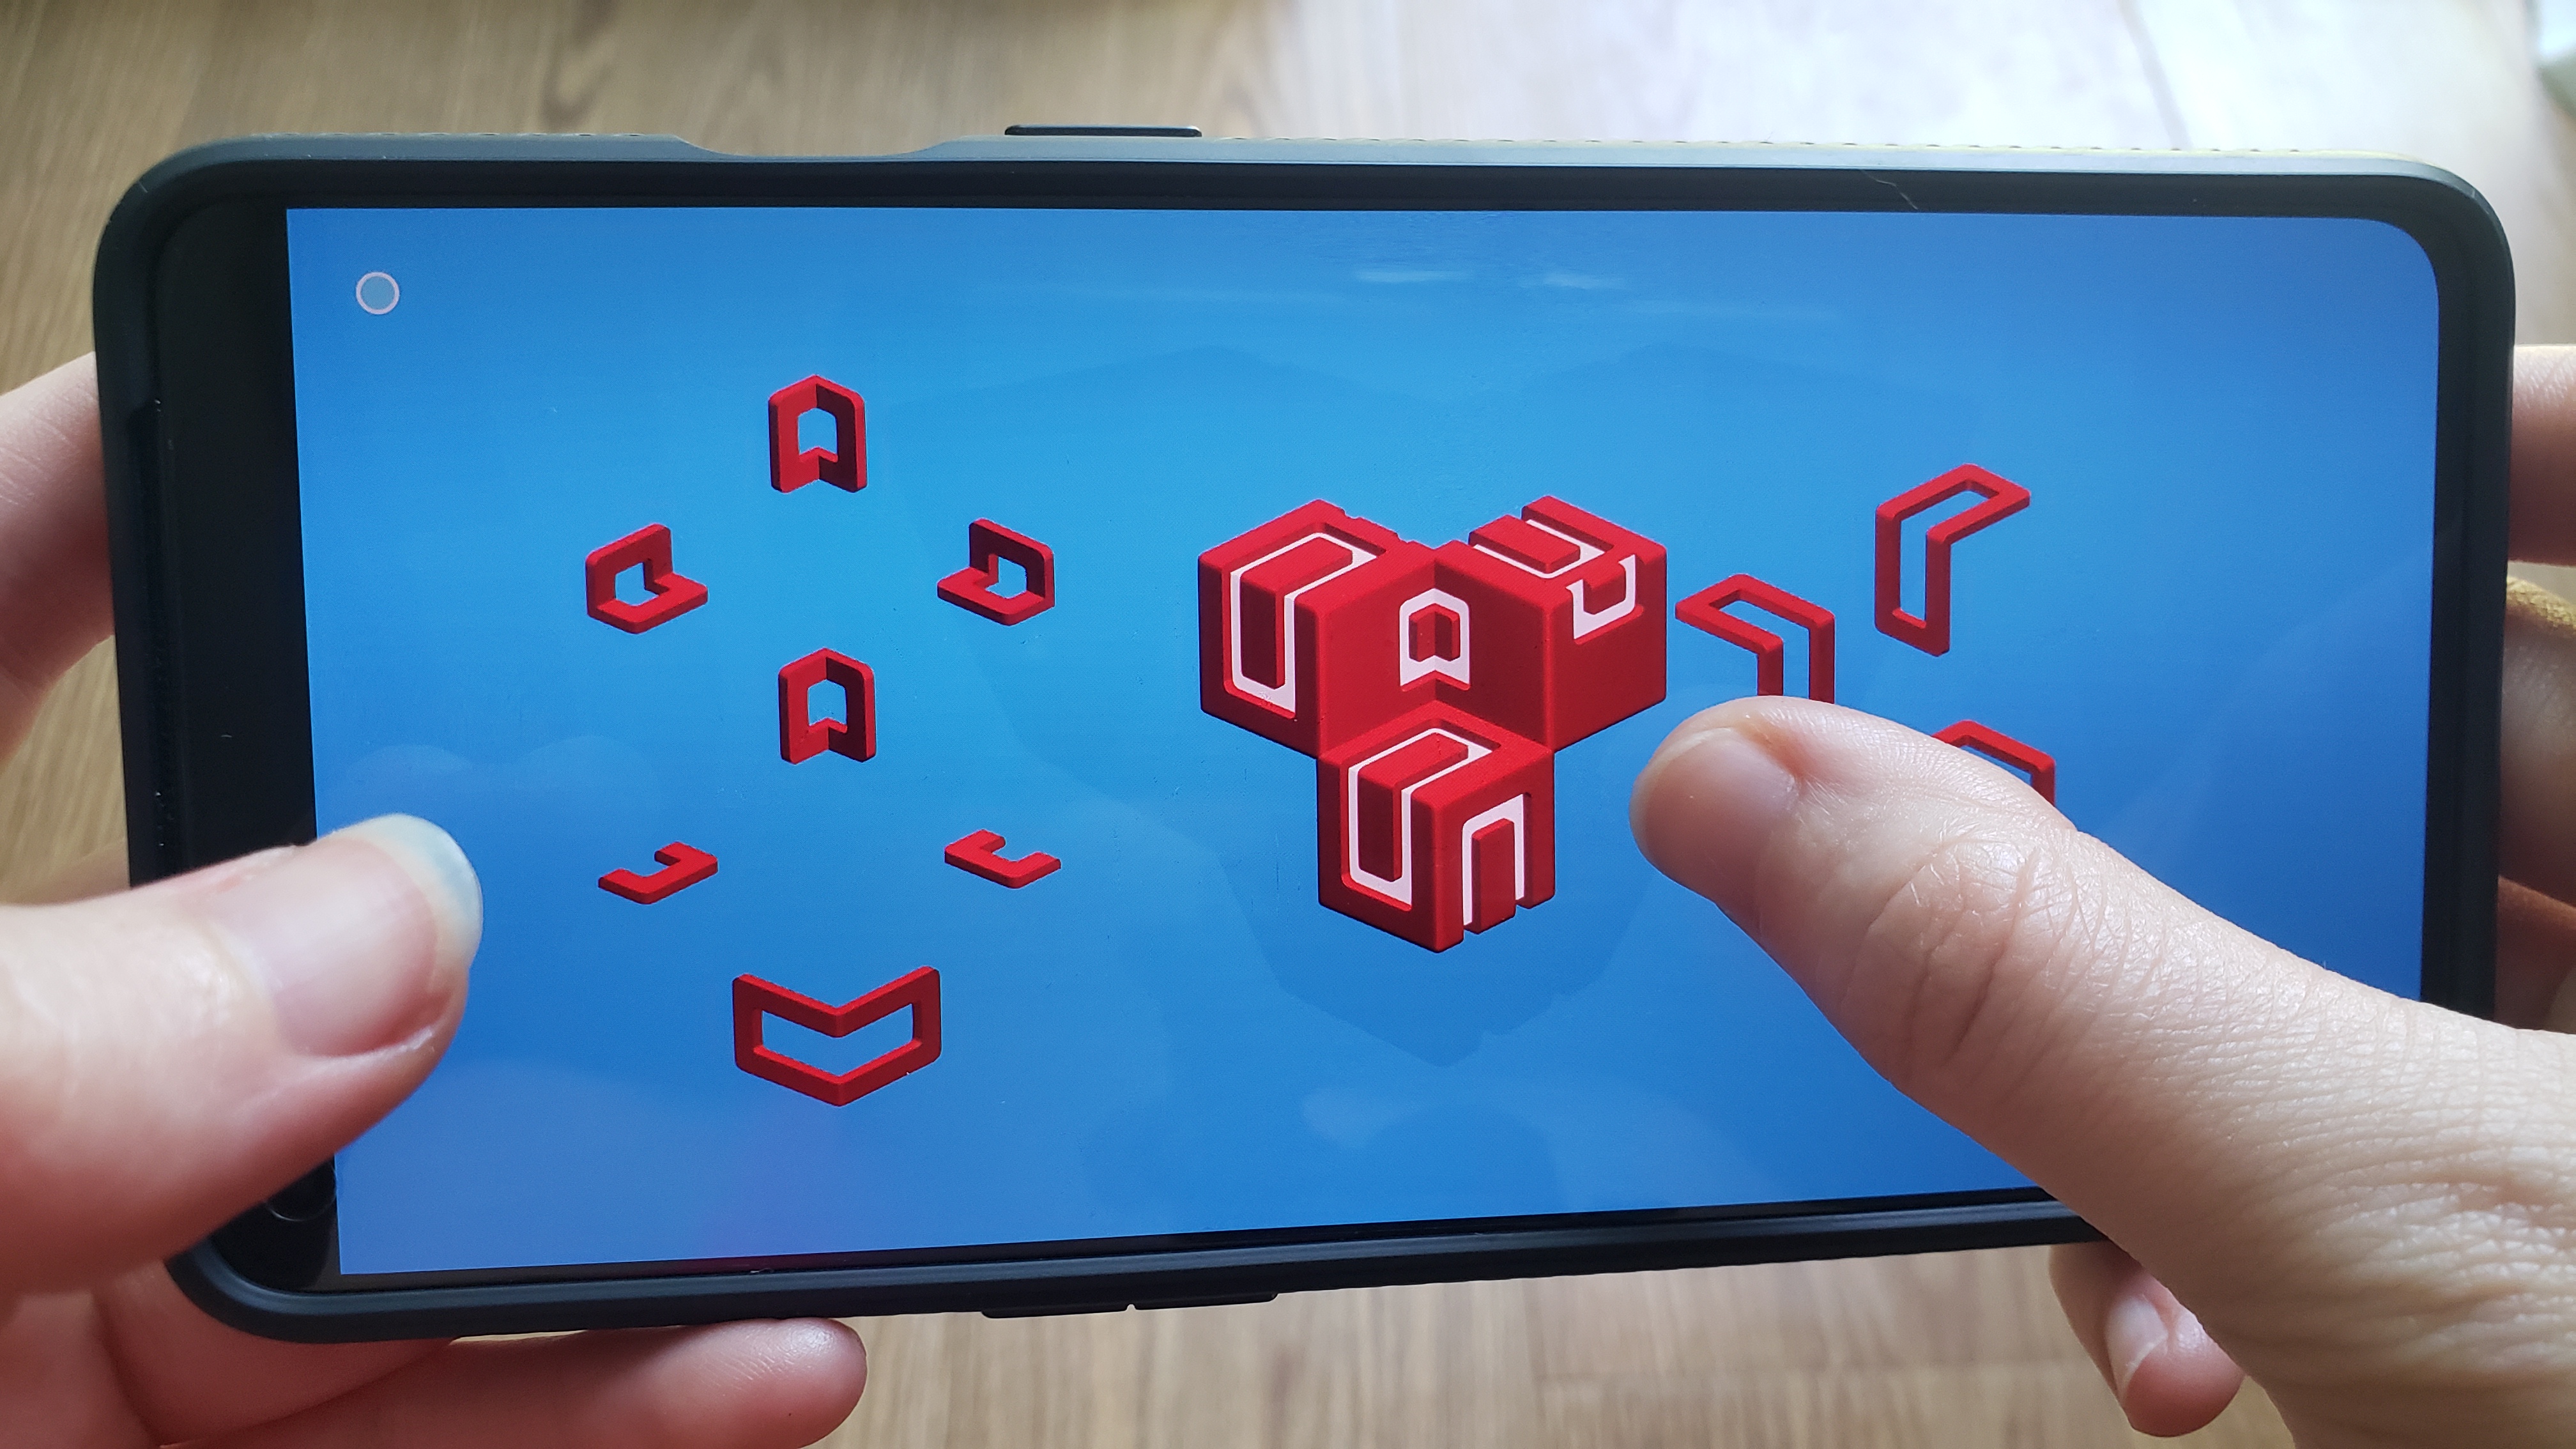 1. Online puzzle games: Engage in similar puzzle-solving experiences through various online platforms.
2. Mobile puzzle apps: Discover alternative puzzle games on your smartphone or tablet.